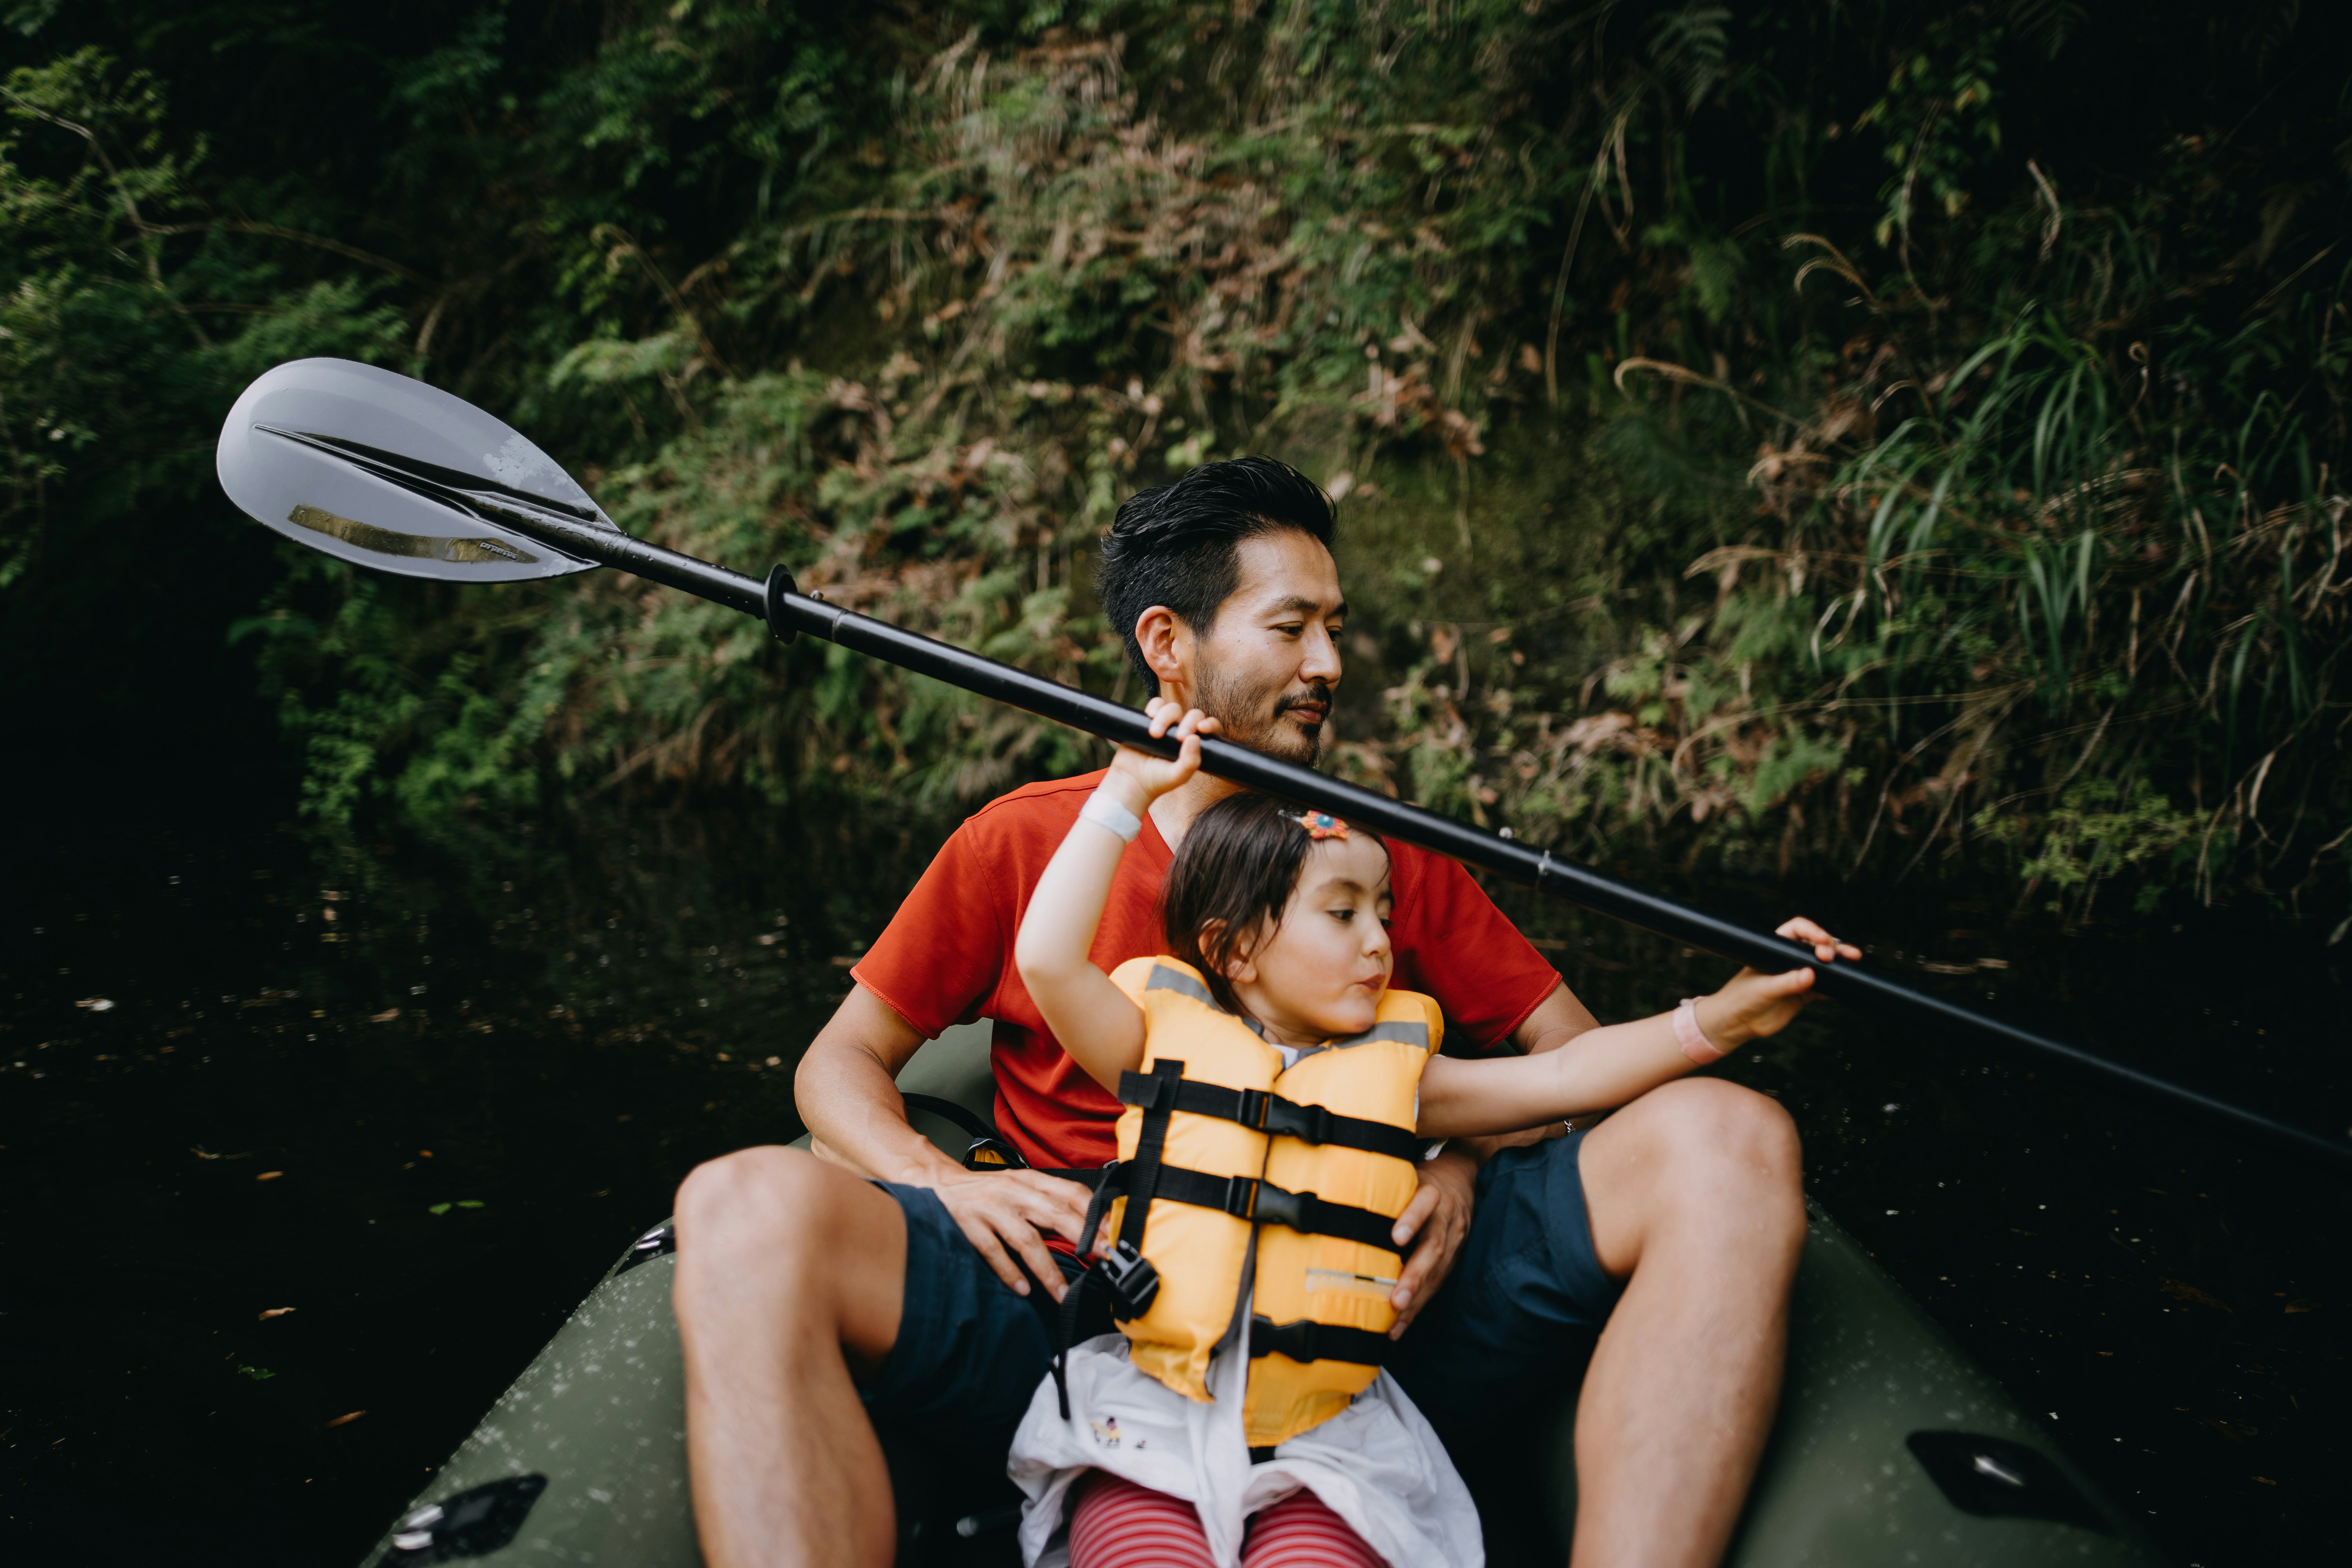 A guide to choosing the best kids life jackets